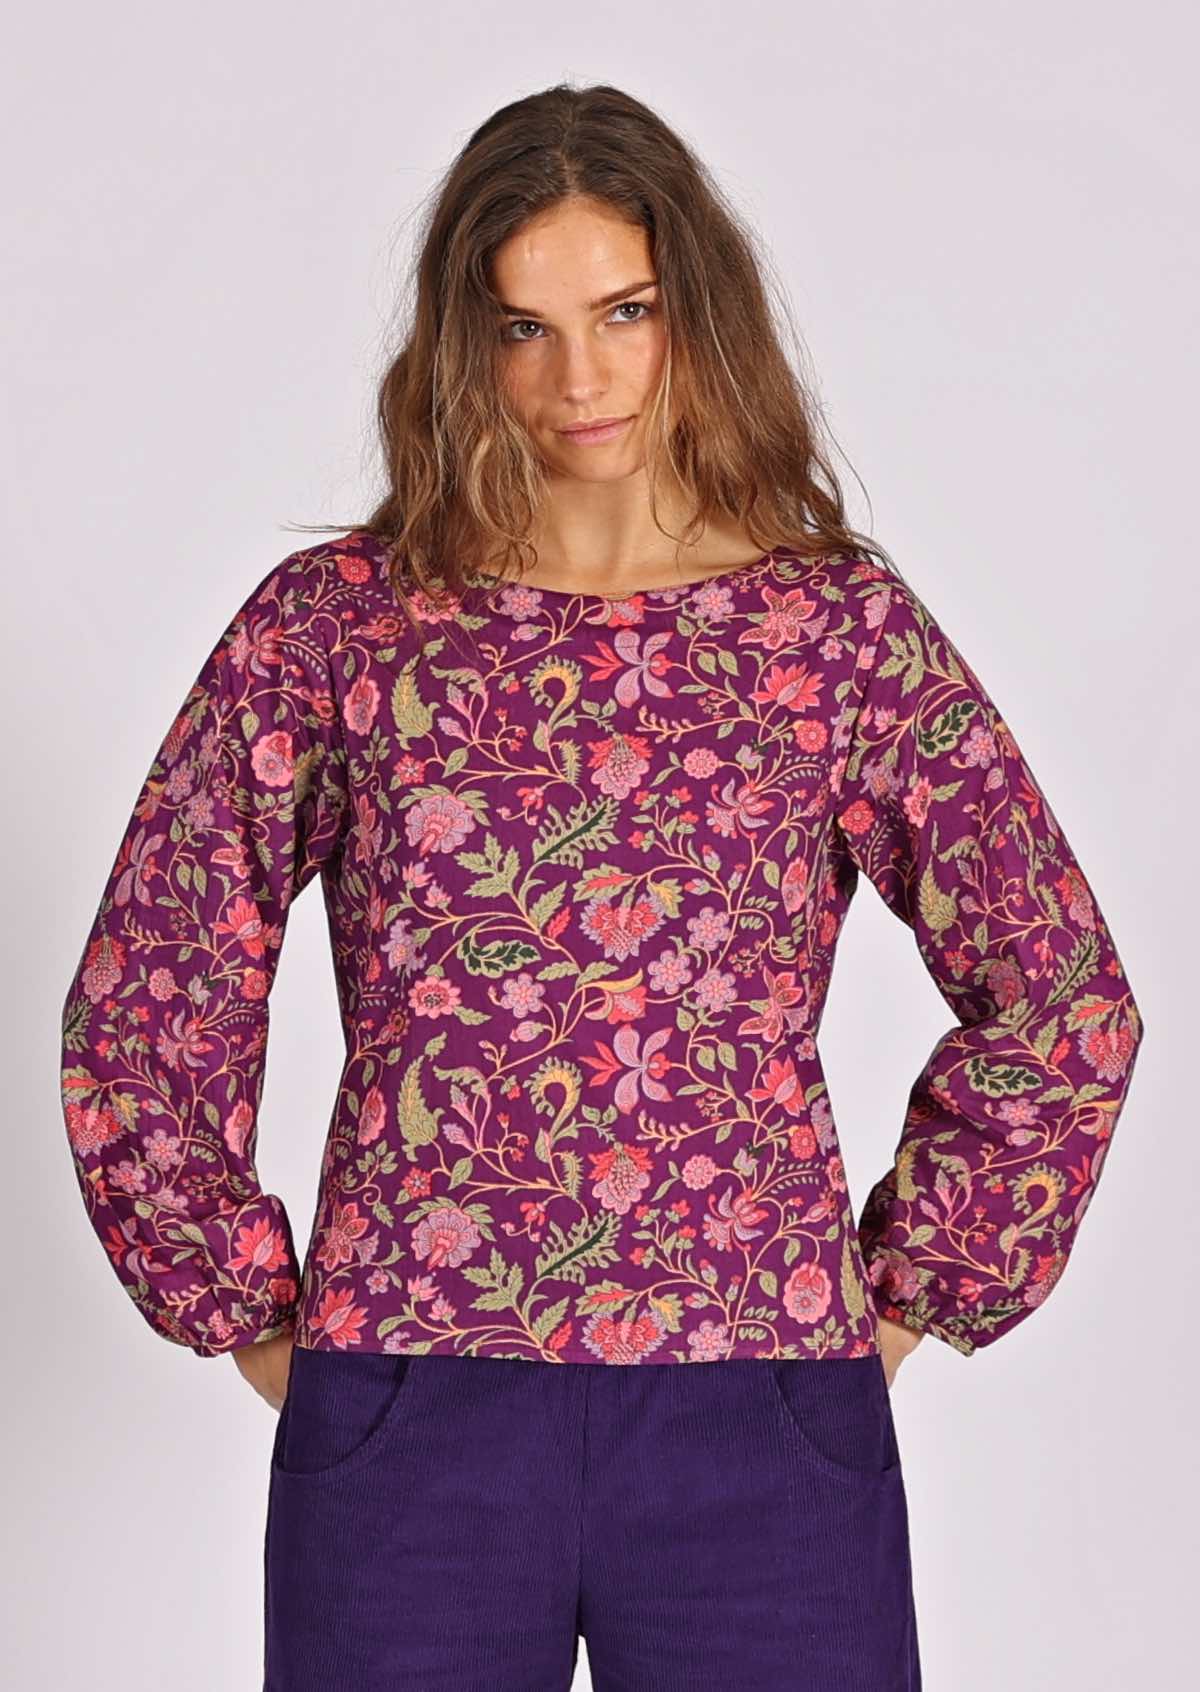 Long sleeve cotton top in sweet purple and pink floral print